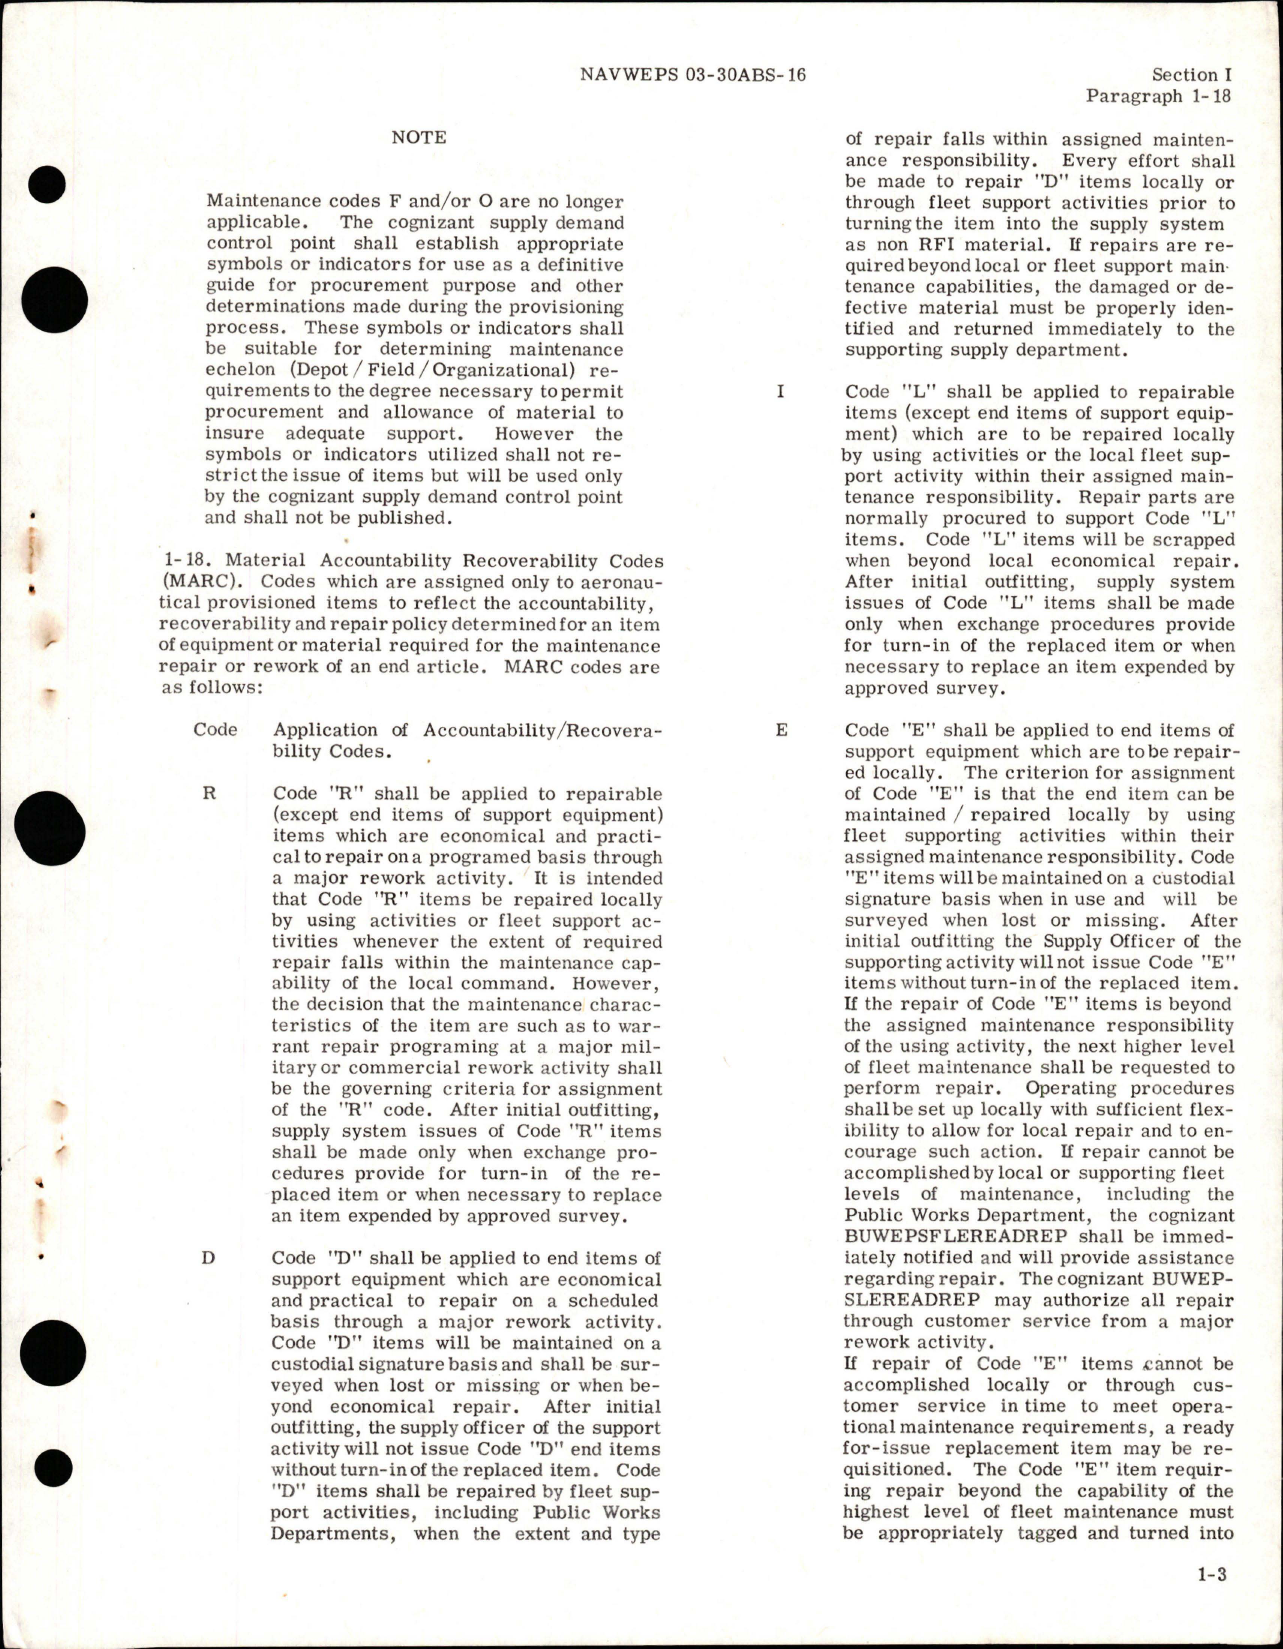 Sample page 5 from AirCorps Library document: Illustrated Parts Breakdown for Ramp and Door Control Manifold Valve - Part HP 892100-8 